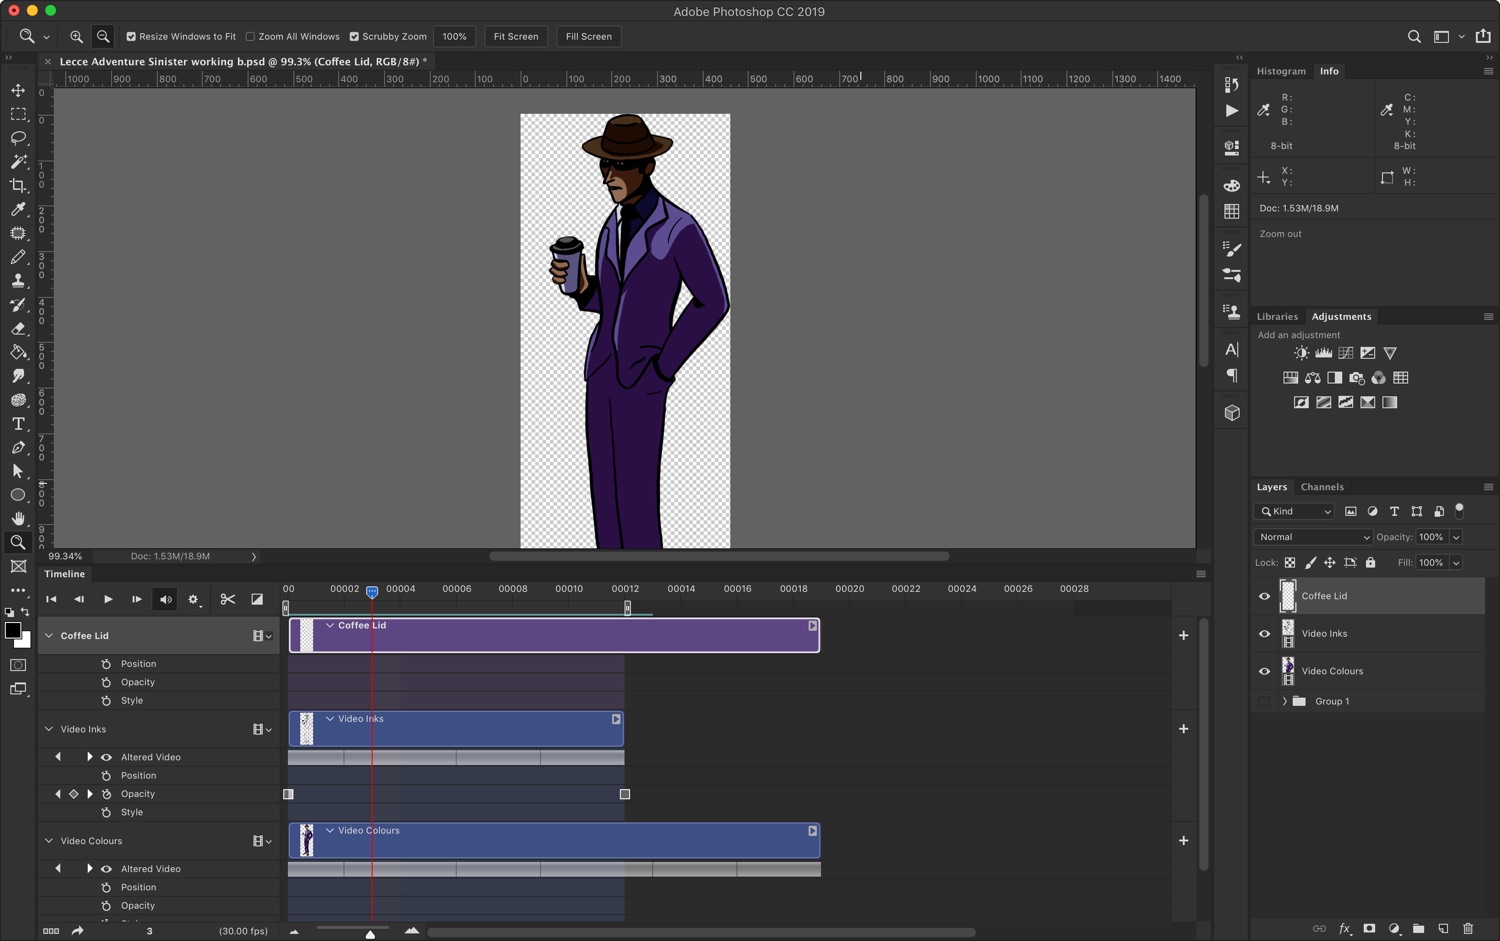 Screenshot of Photoshop in animation mode. In the middle of the screen is a silhouette of a knight and at the bottom is Photoshop's video editing timeline.